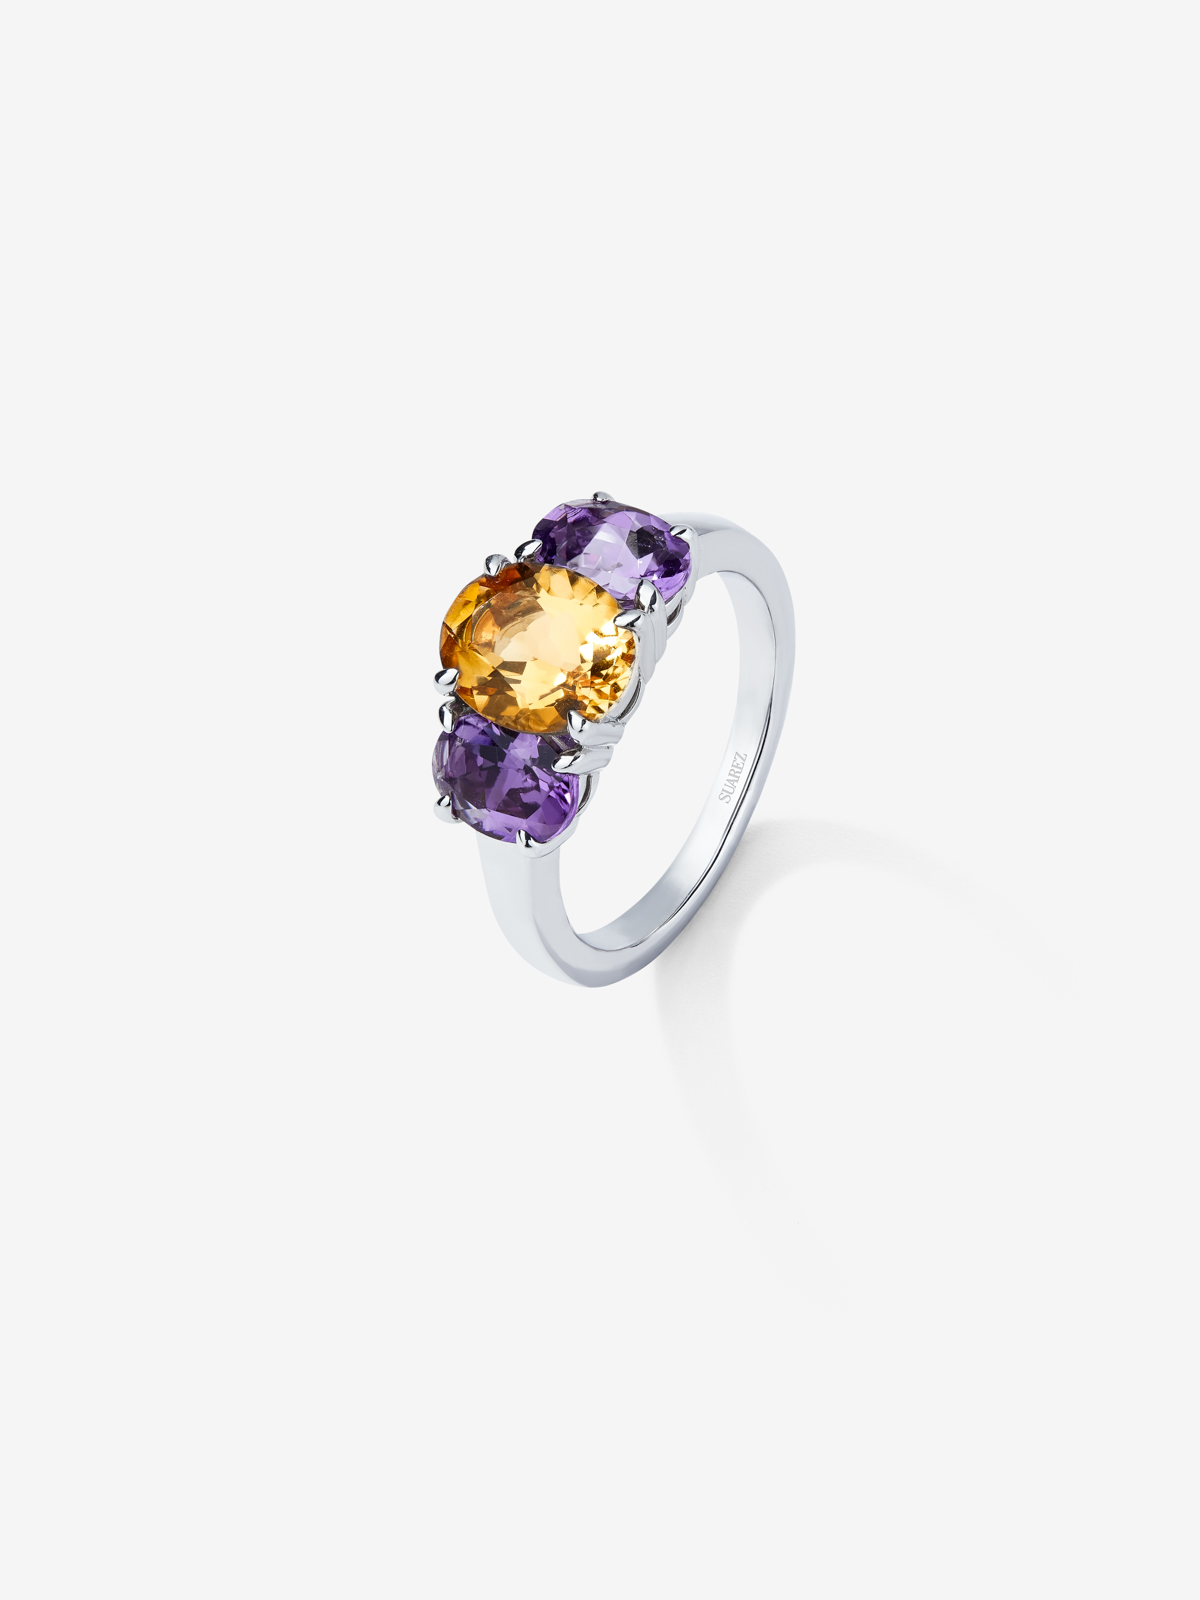 925 Silver Trio Ring with Citrine and Amethysts